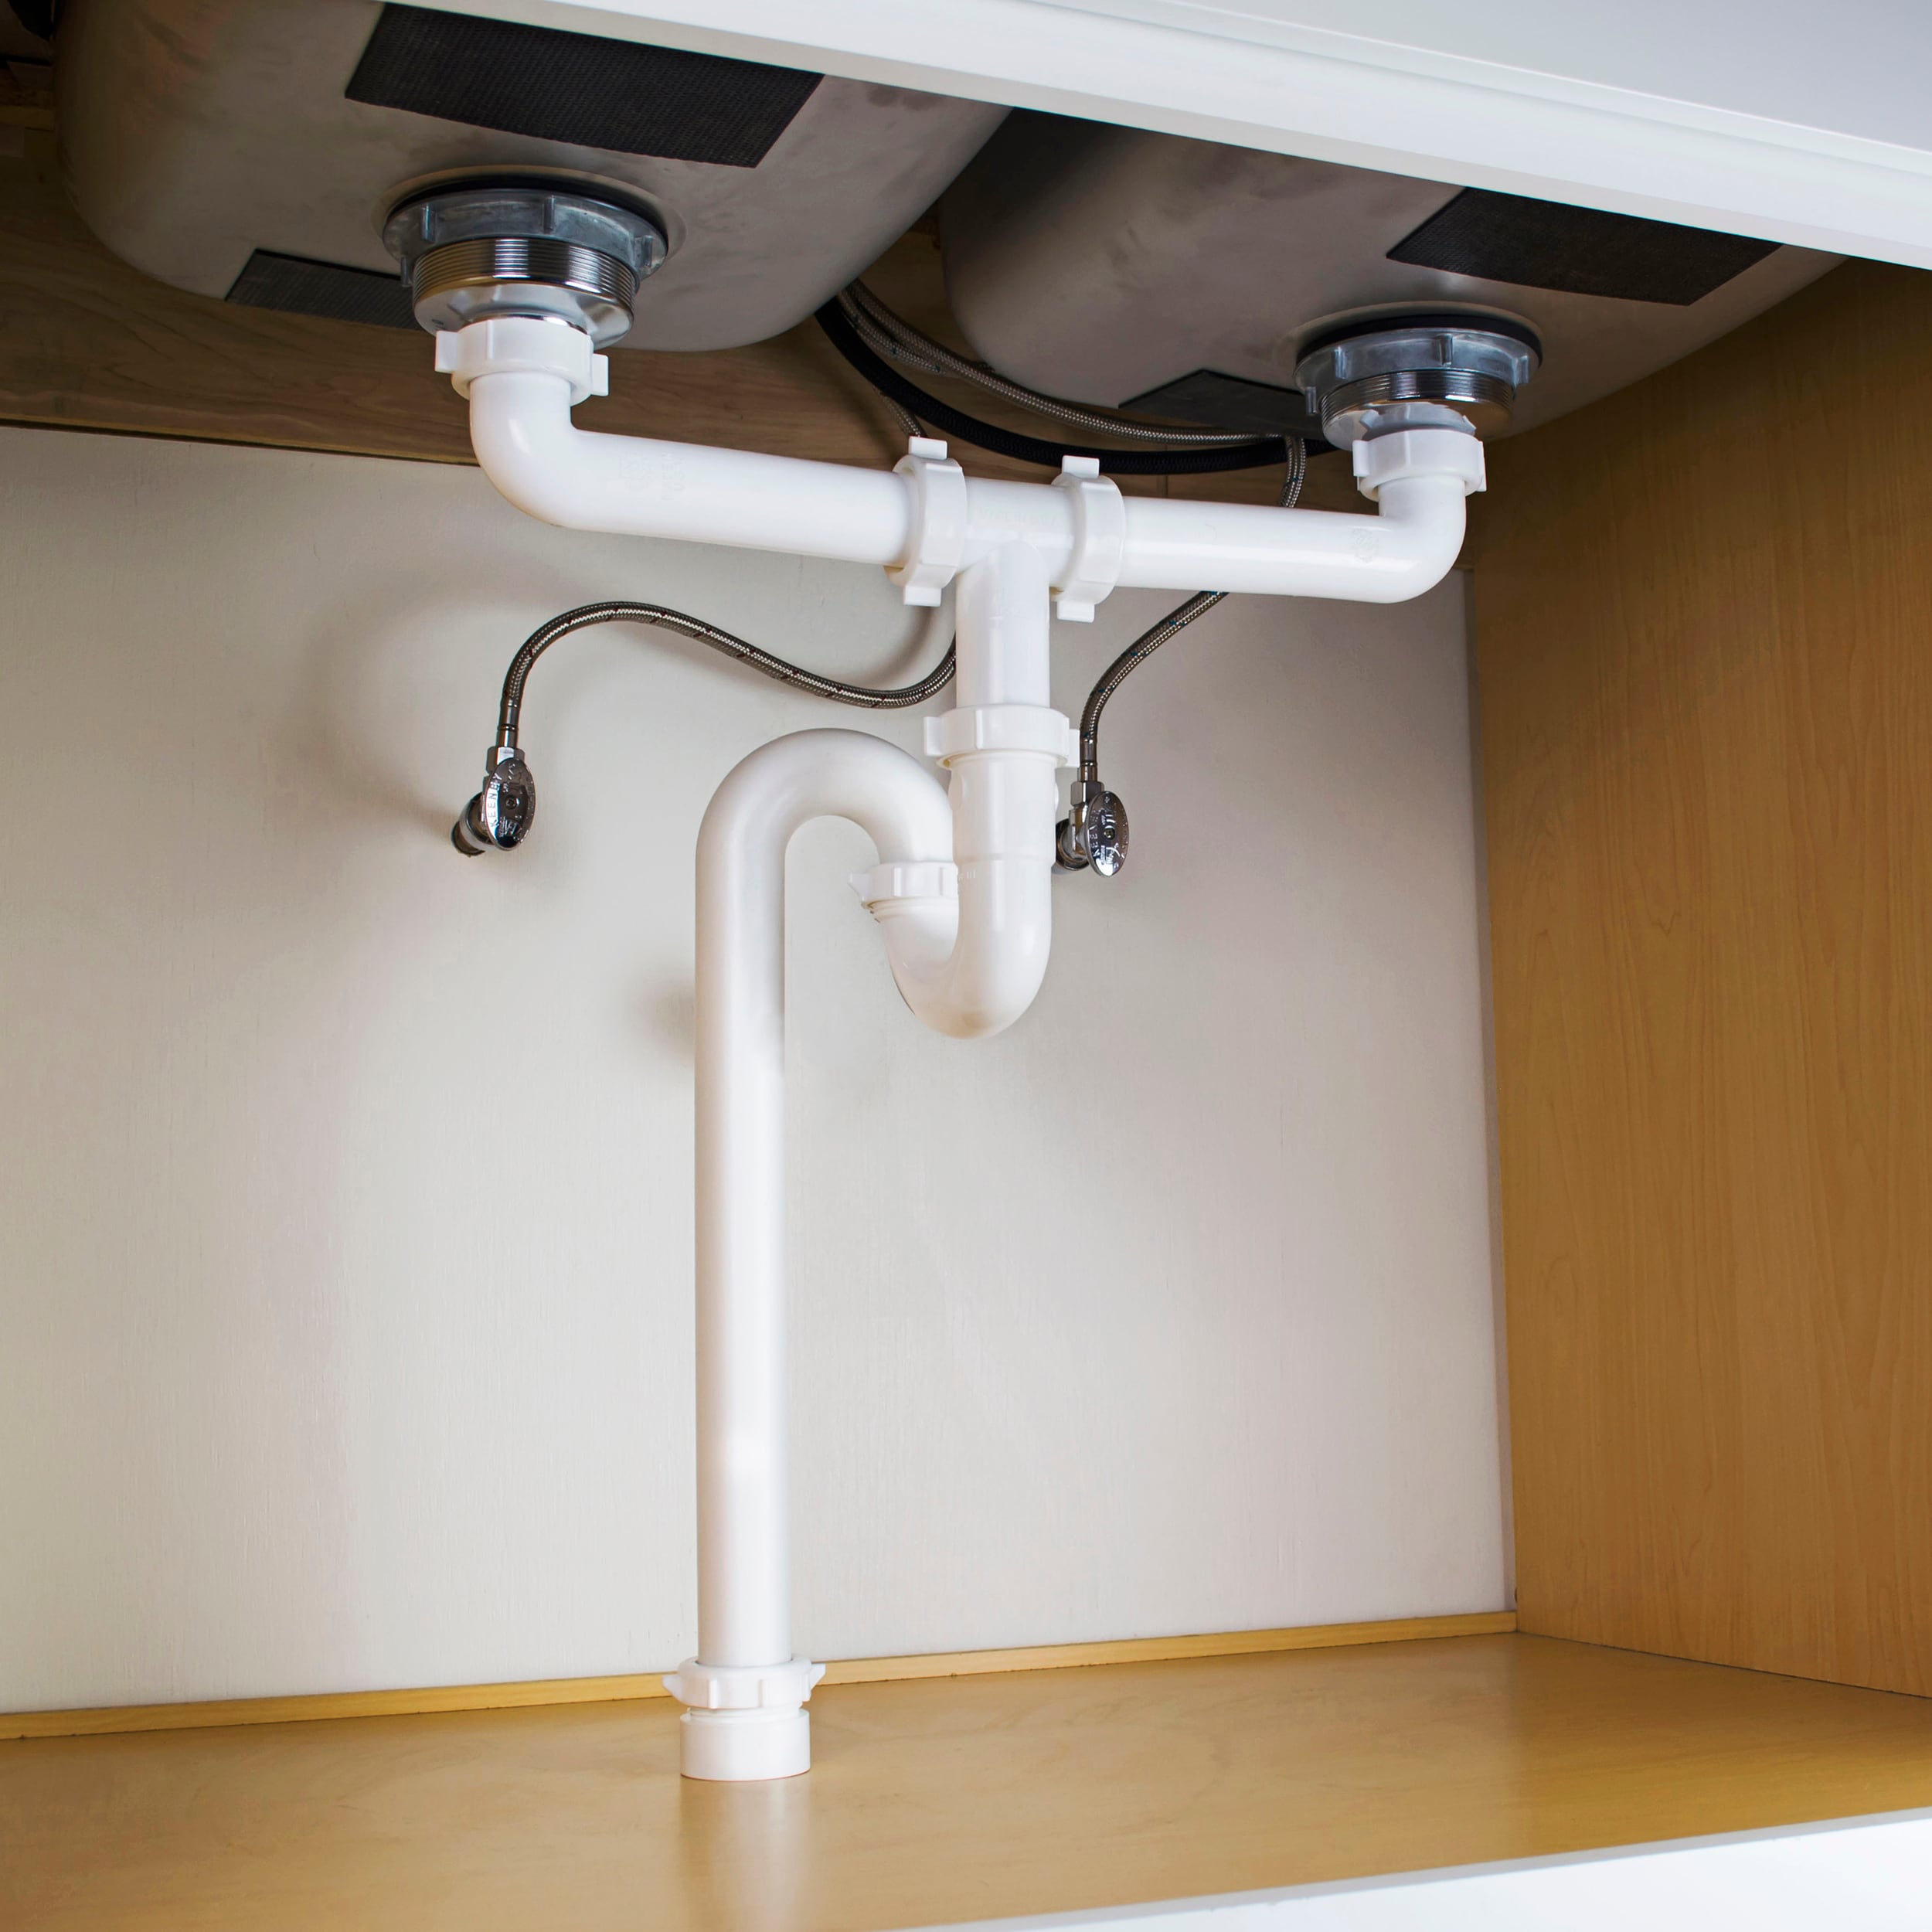 How to Plumb a Sink Drain Through the Floor 